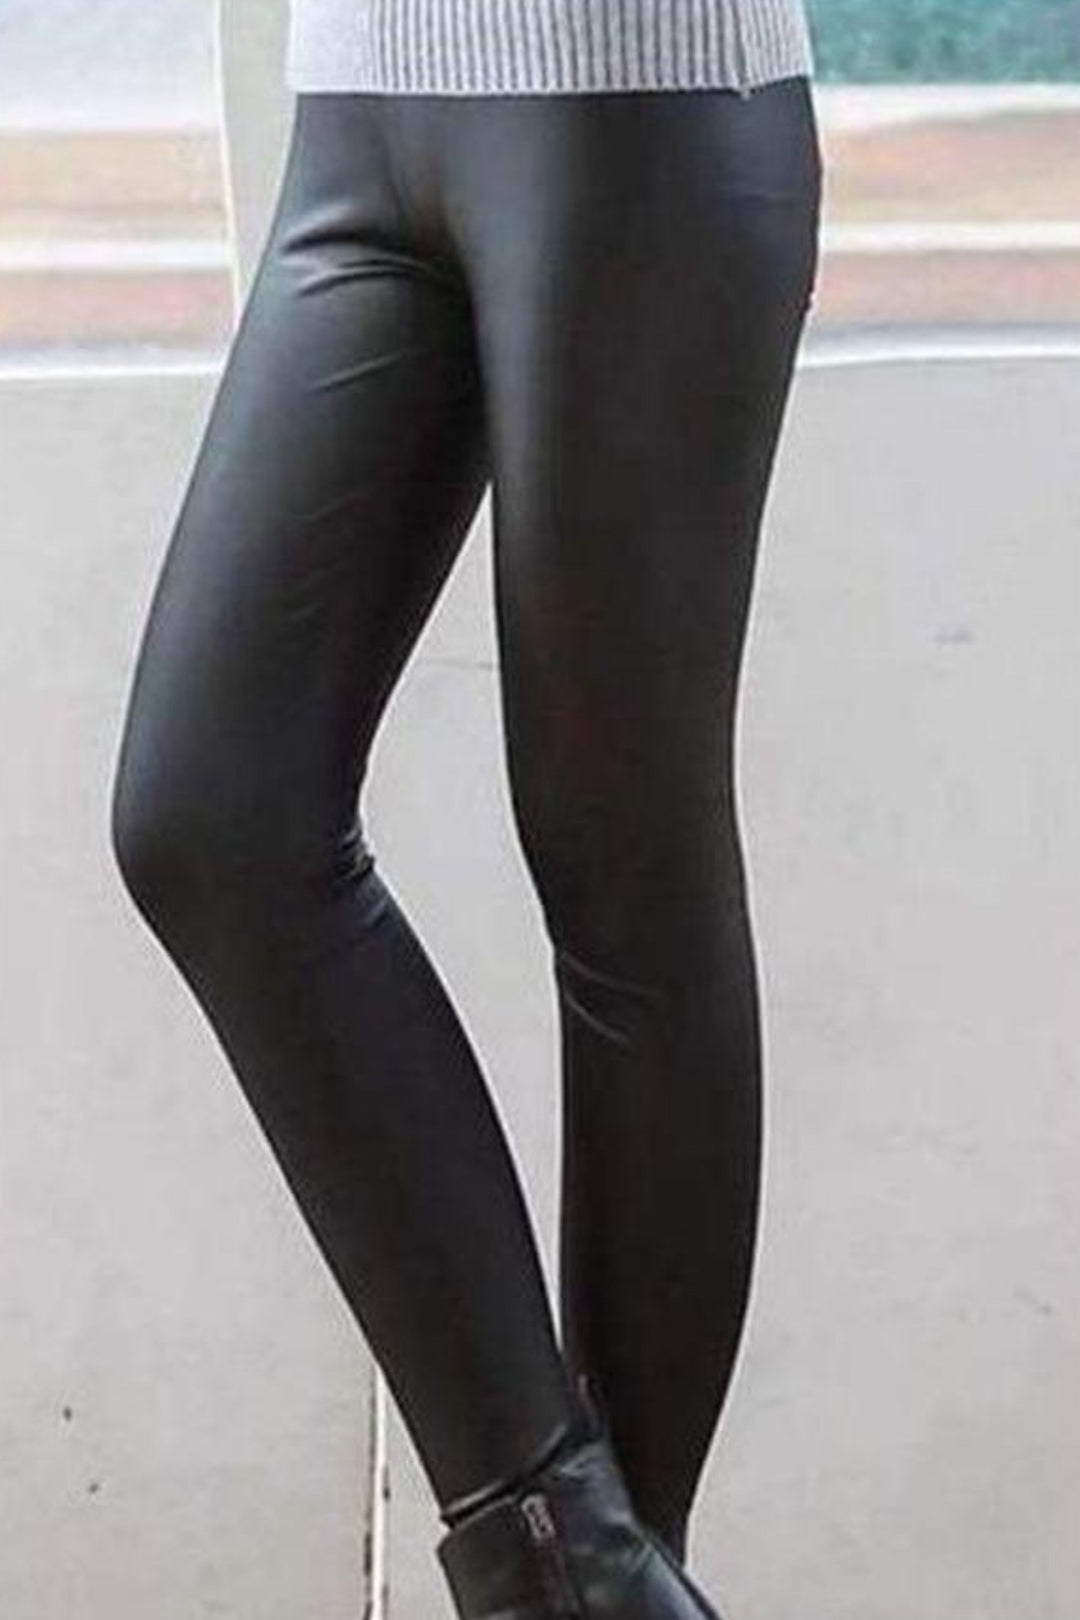 Pants For Women Stretchable High Waist Women's Stretchy Leather Leggings  Pants, Black High Waisted Tights Black 